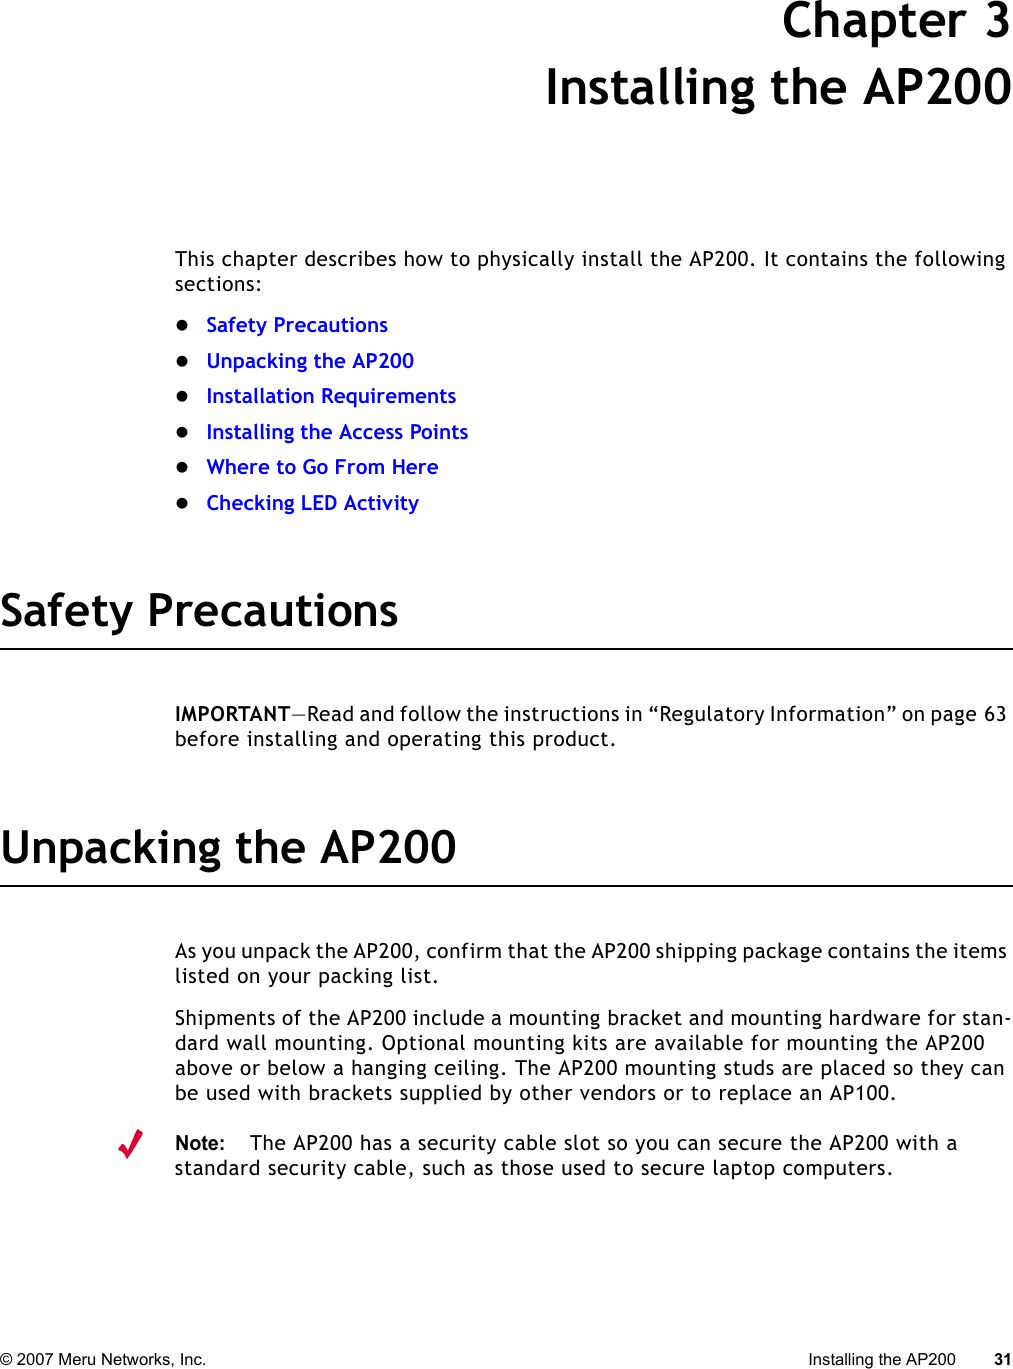 © 2007 Meru Networks, Inc. Installing the AP200 31 Chapter 3Installing the AP200This chapter describes how to physically install the AP200. It contains the following sections:zSafety PrecautionszUnpacking the AP200zInstallation RequirementszInstalling the Access PointszWhere to Go From HerezChecking LED ActivitySafety PrecautionsIMPORTANT—Read and follow the instructions in “Regulatory Information” on page 63 before installing and operating this product.Unpacking the AP200As you unpack the AP200, confirm that the AP200 shipping package contains the items listed on your packing list.Shipments of the AP200 include a mounting bracket and mounting hardware for stan-dard wall mounting. Optional mounting kits are available for mounting the AP200 above or below a hanging ceiling. The AP200 mounting studs are placed so they can be used with brackets supplied by other vendors or to replace an AP100.Note:The AP200 has a security cable slot so you can secure the AP200 with a standard security cable, such as those used to secure laptop computers.